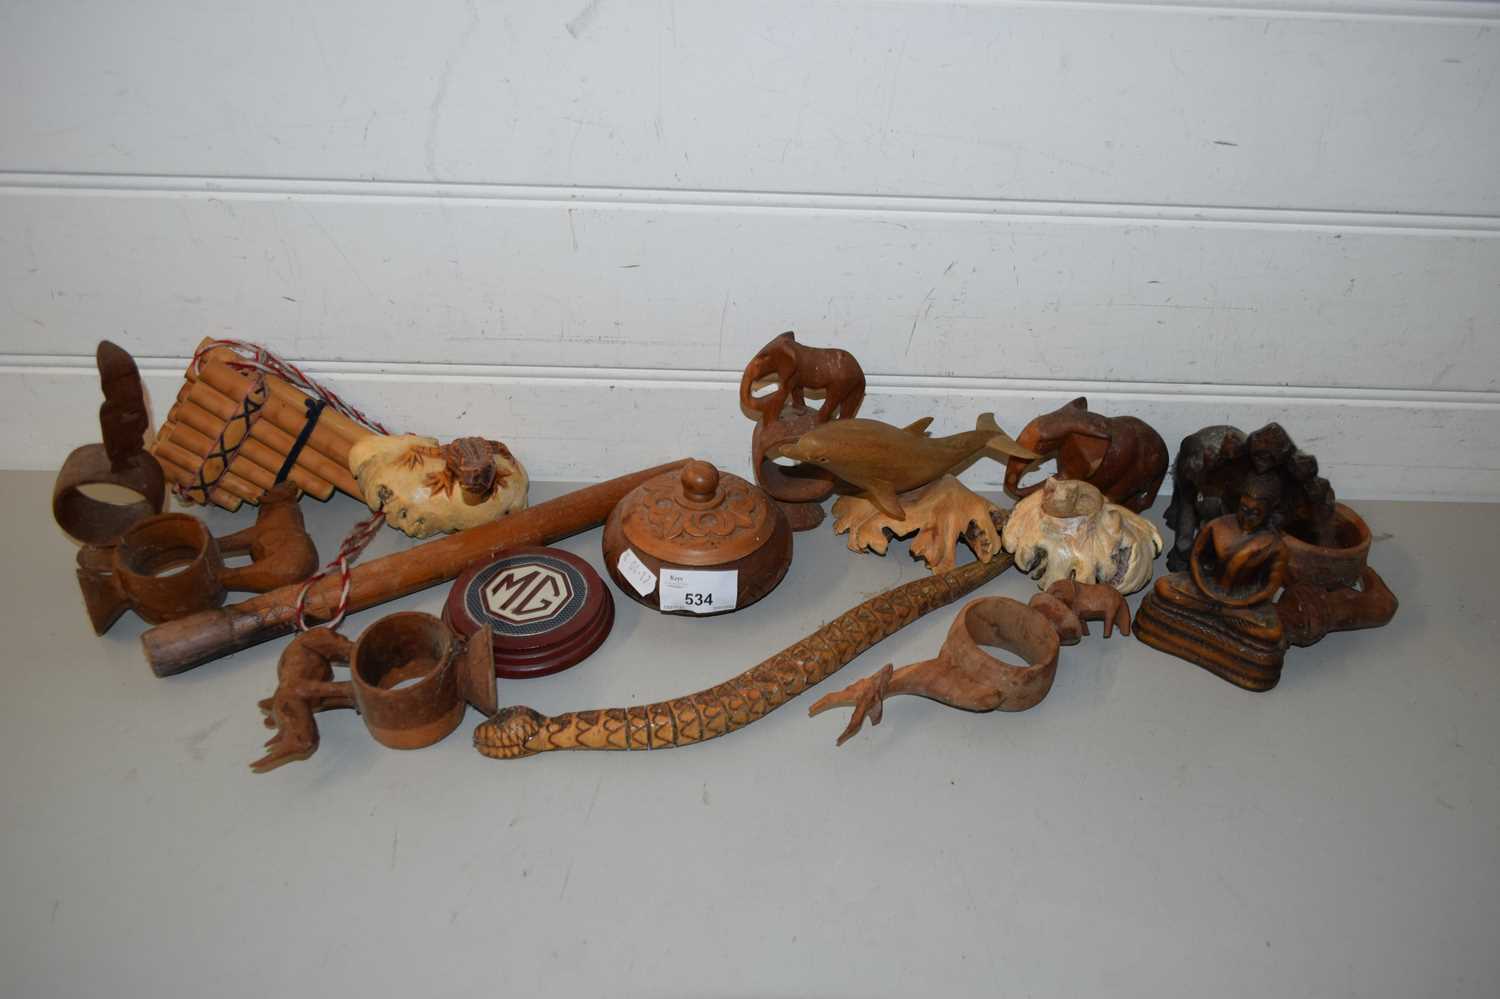 COLLECTION OF VARIOUS WOODEN MODEL ANIMALS, NAPKIN RINGS AND OTHER ITEMS